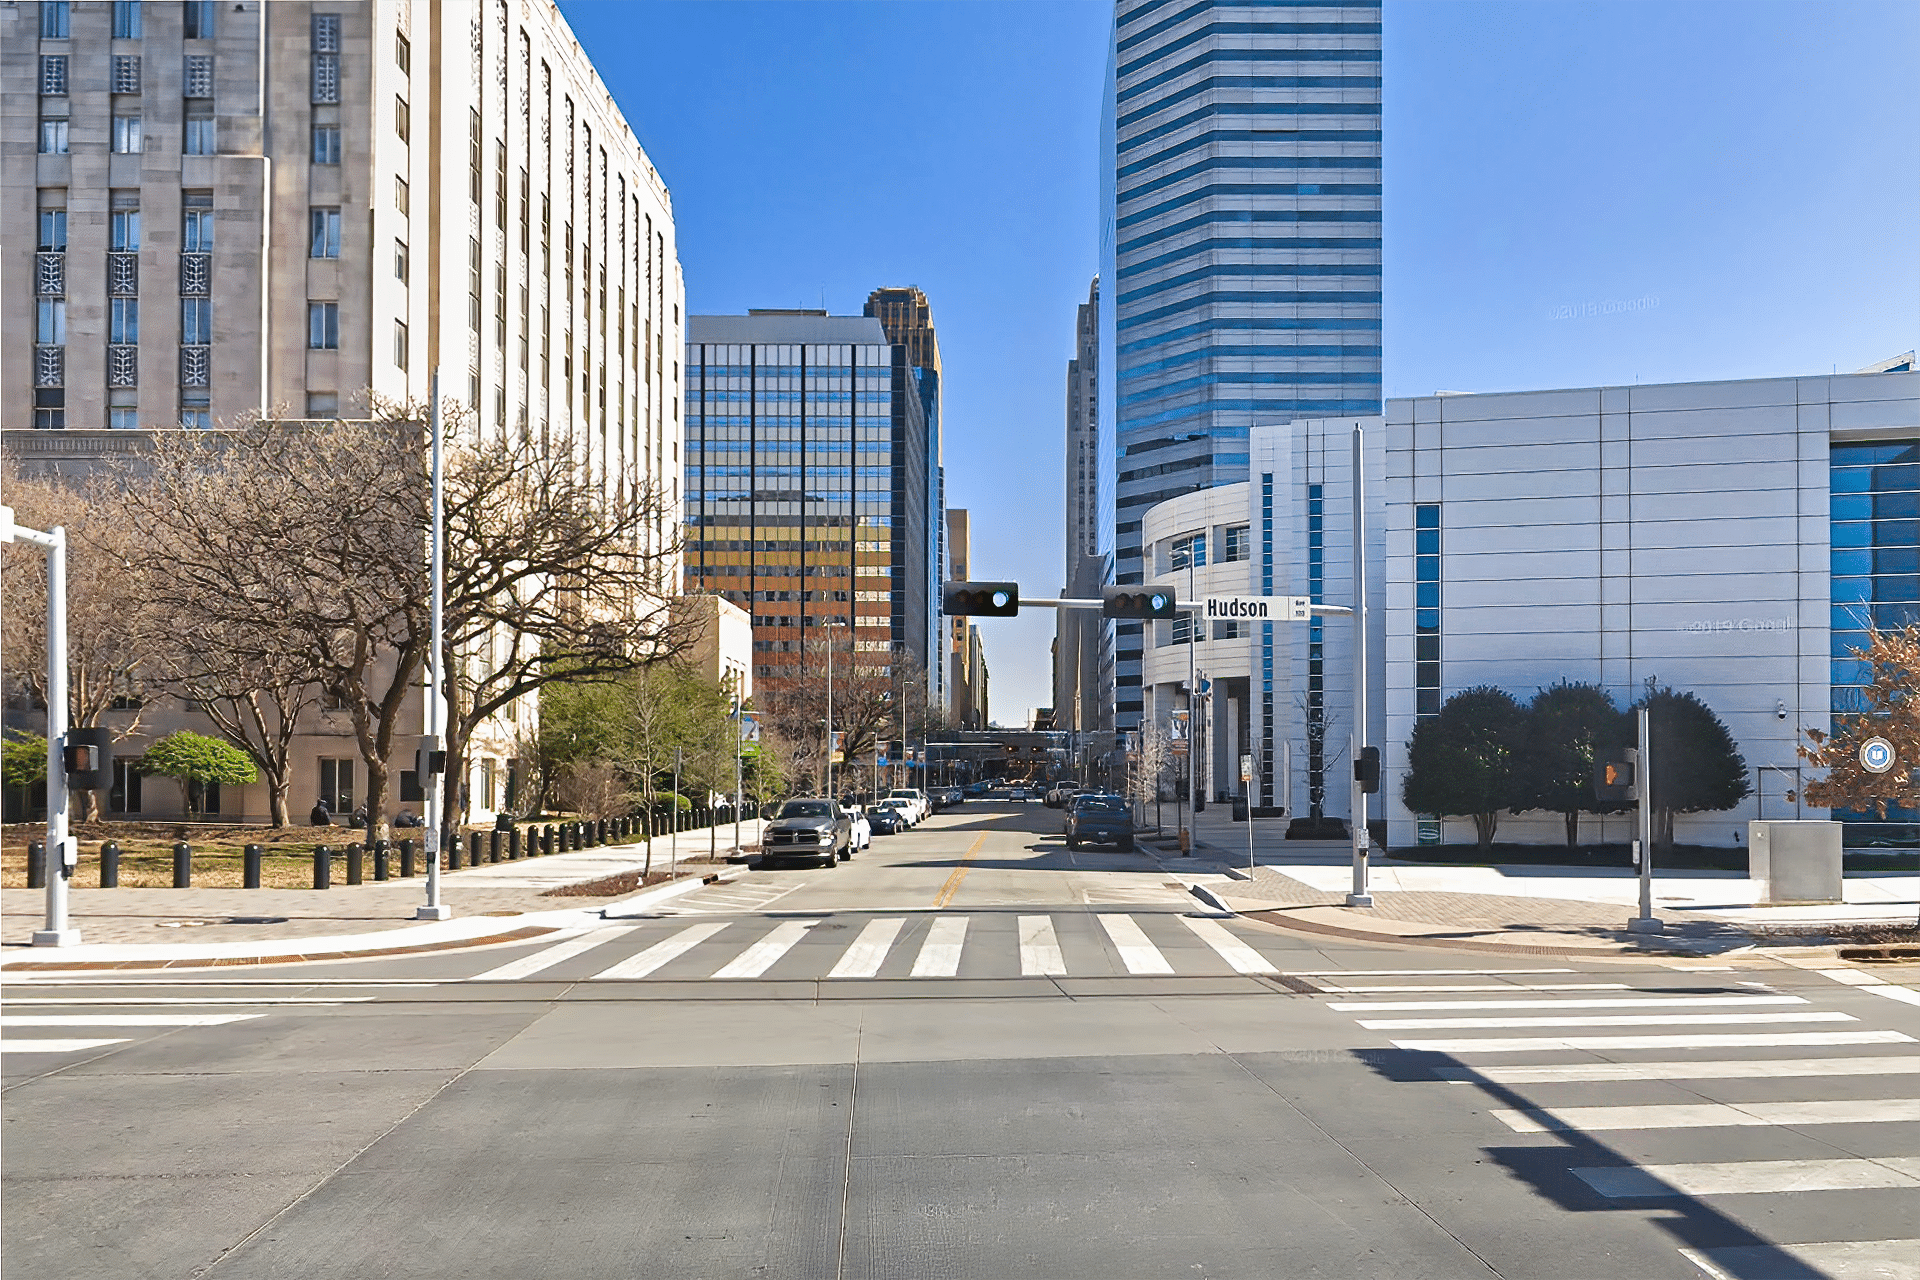 Park Avenue, a city street with tall buildings and a crosswalk.